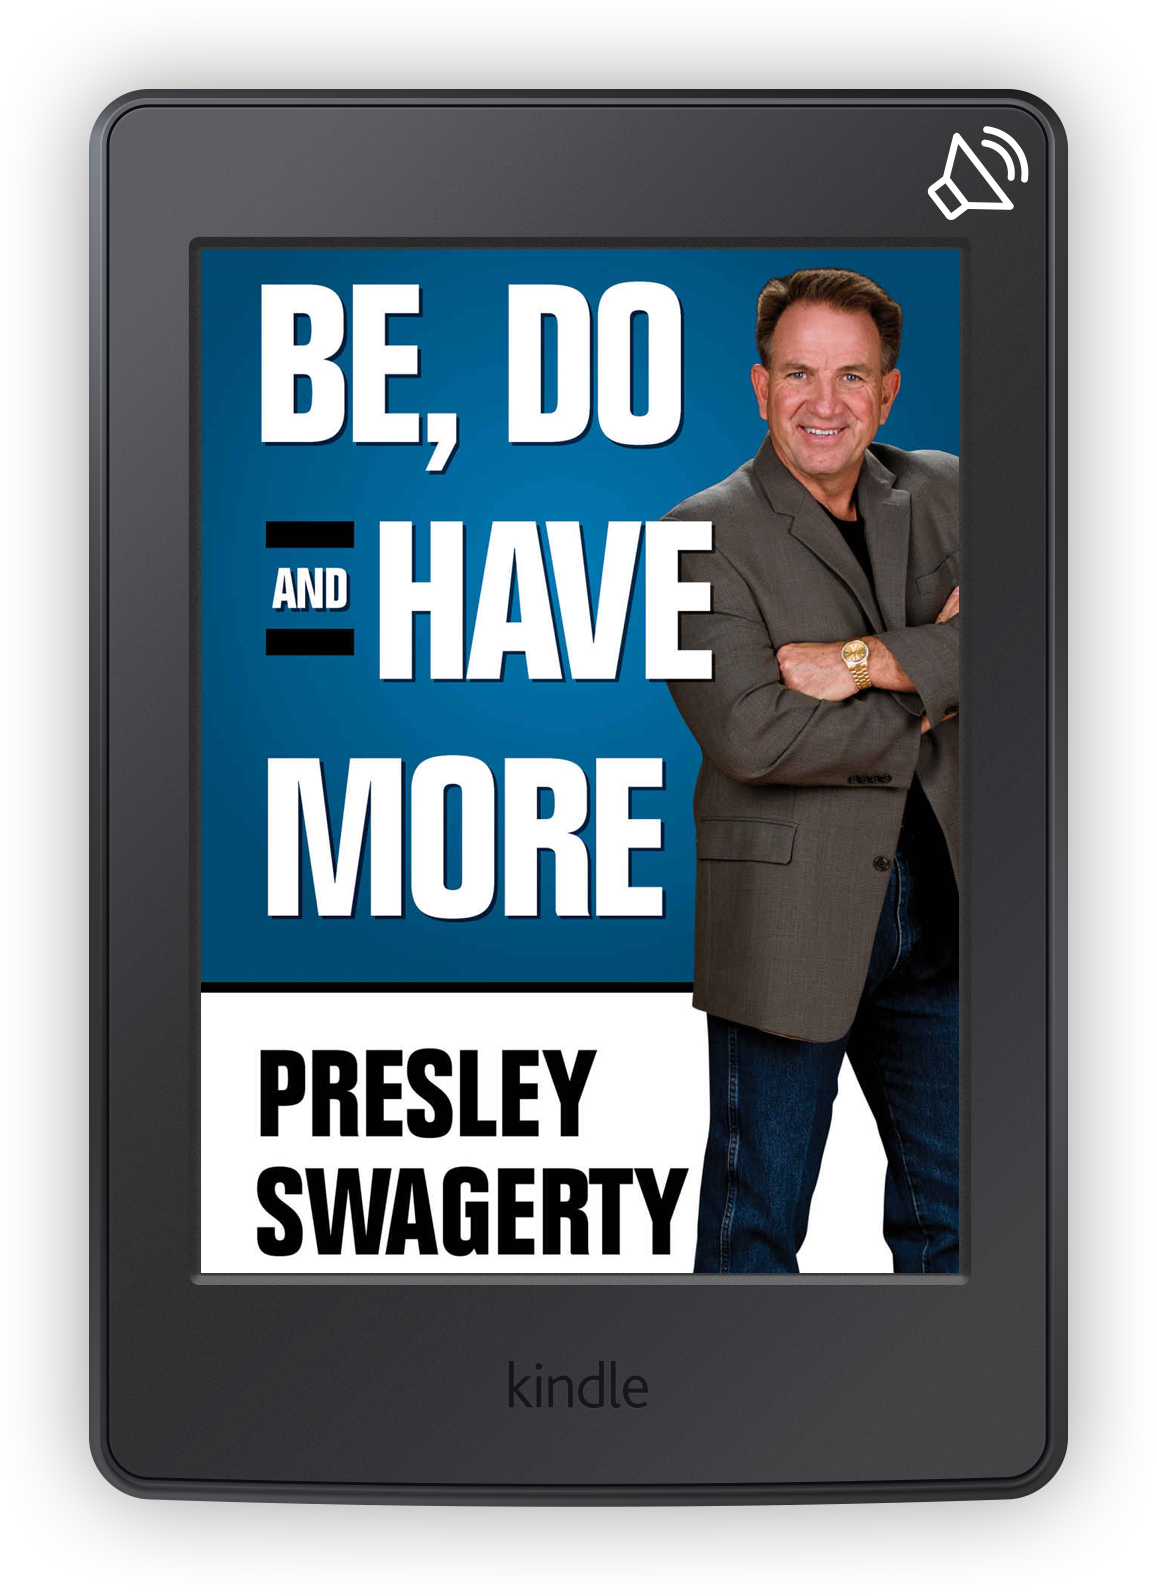 Photo of Be Do and Have More audiobook cover by Presley Swagerty on Kindle tablet